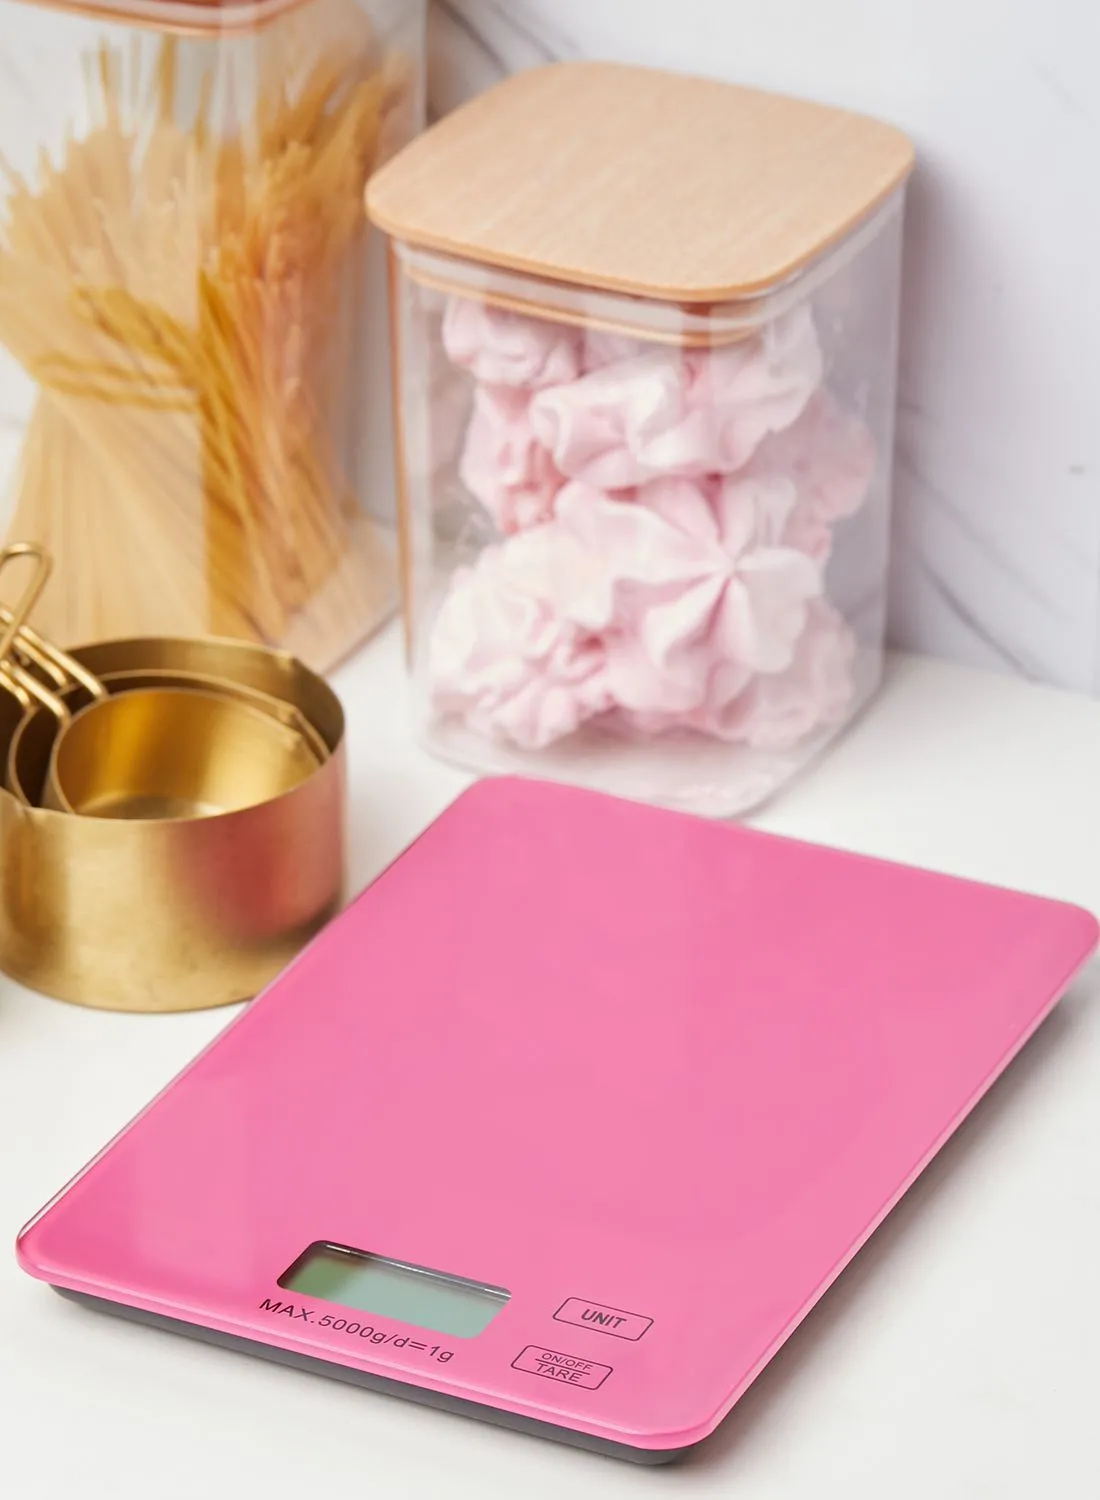 Premier Zing Hot Pink Electronic Kitchen Scale